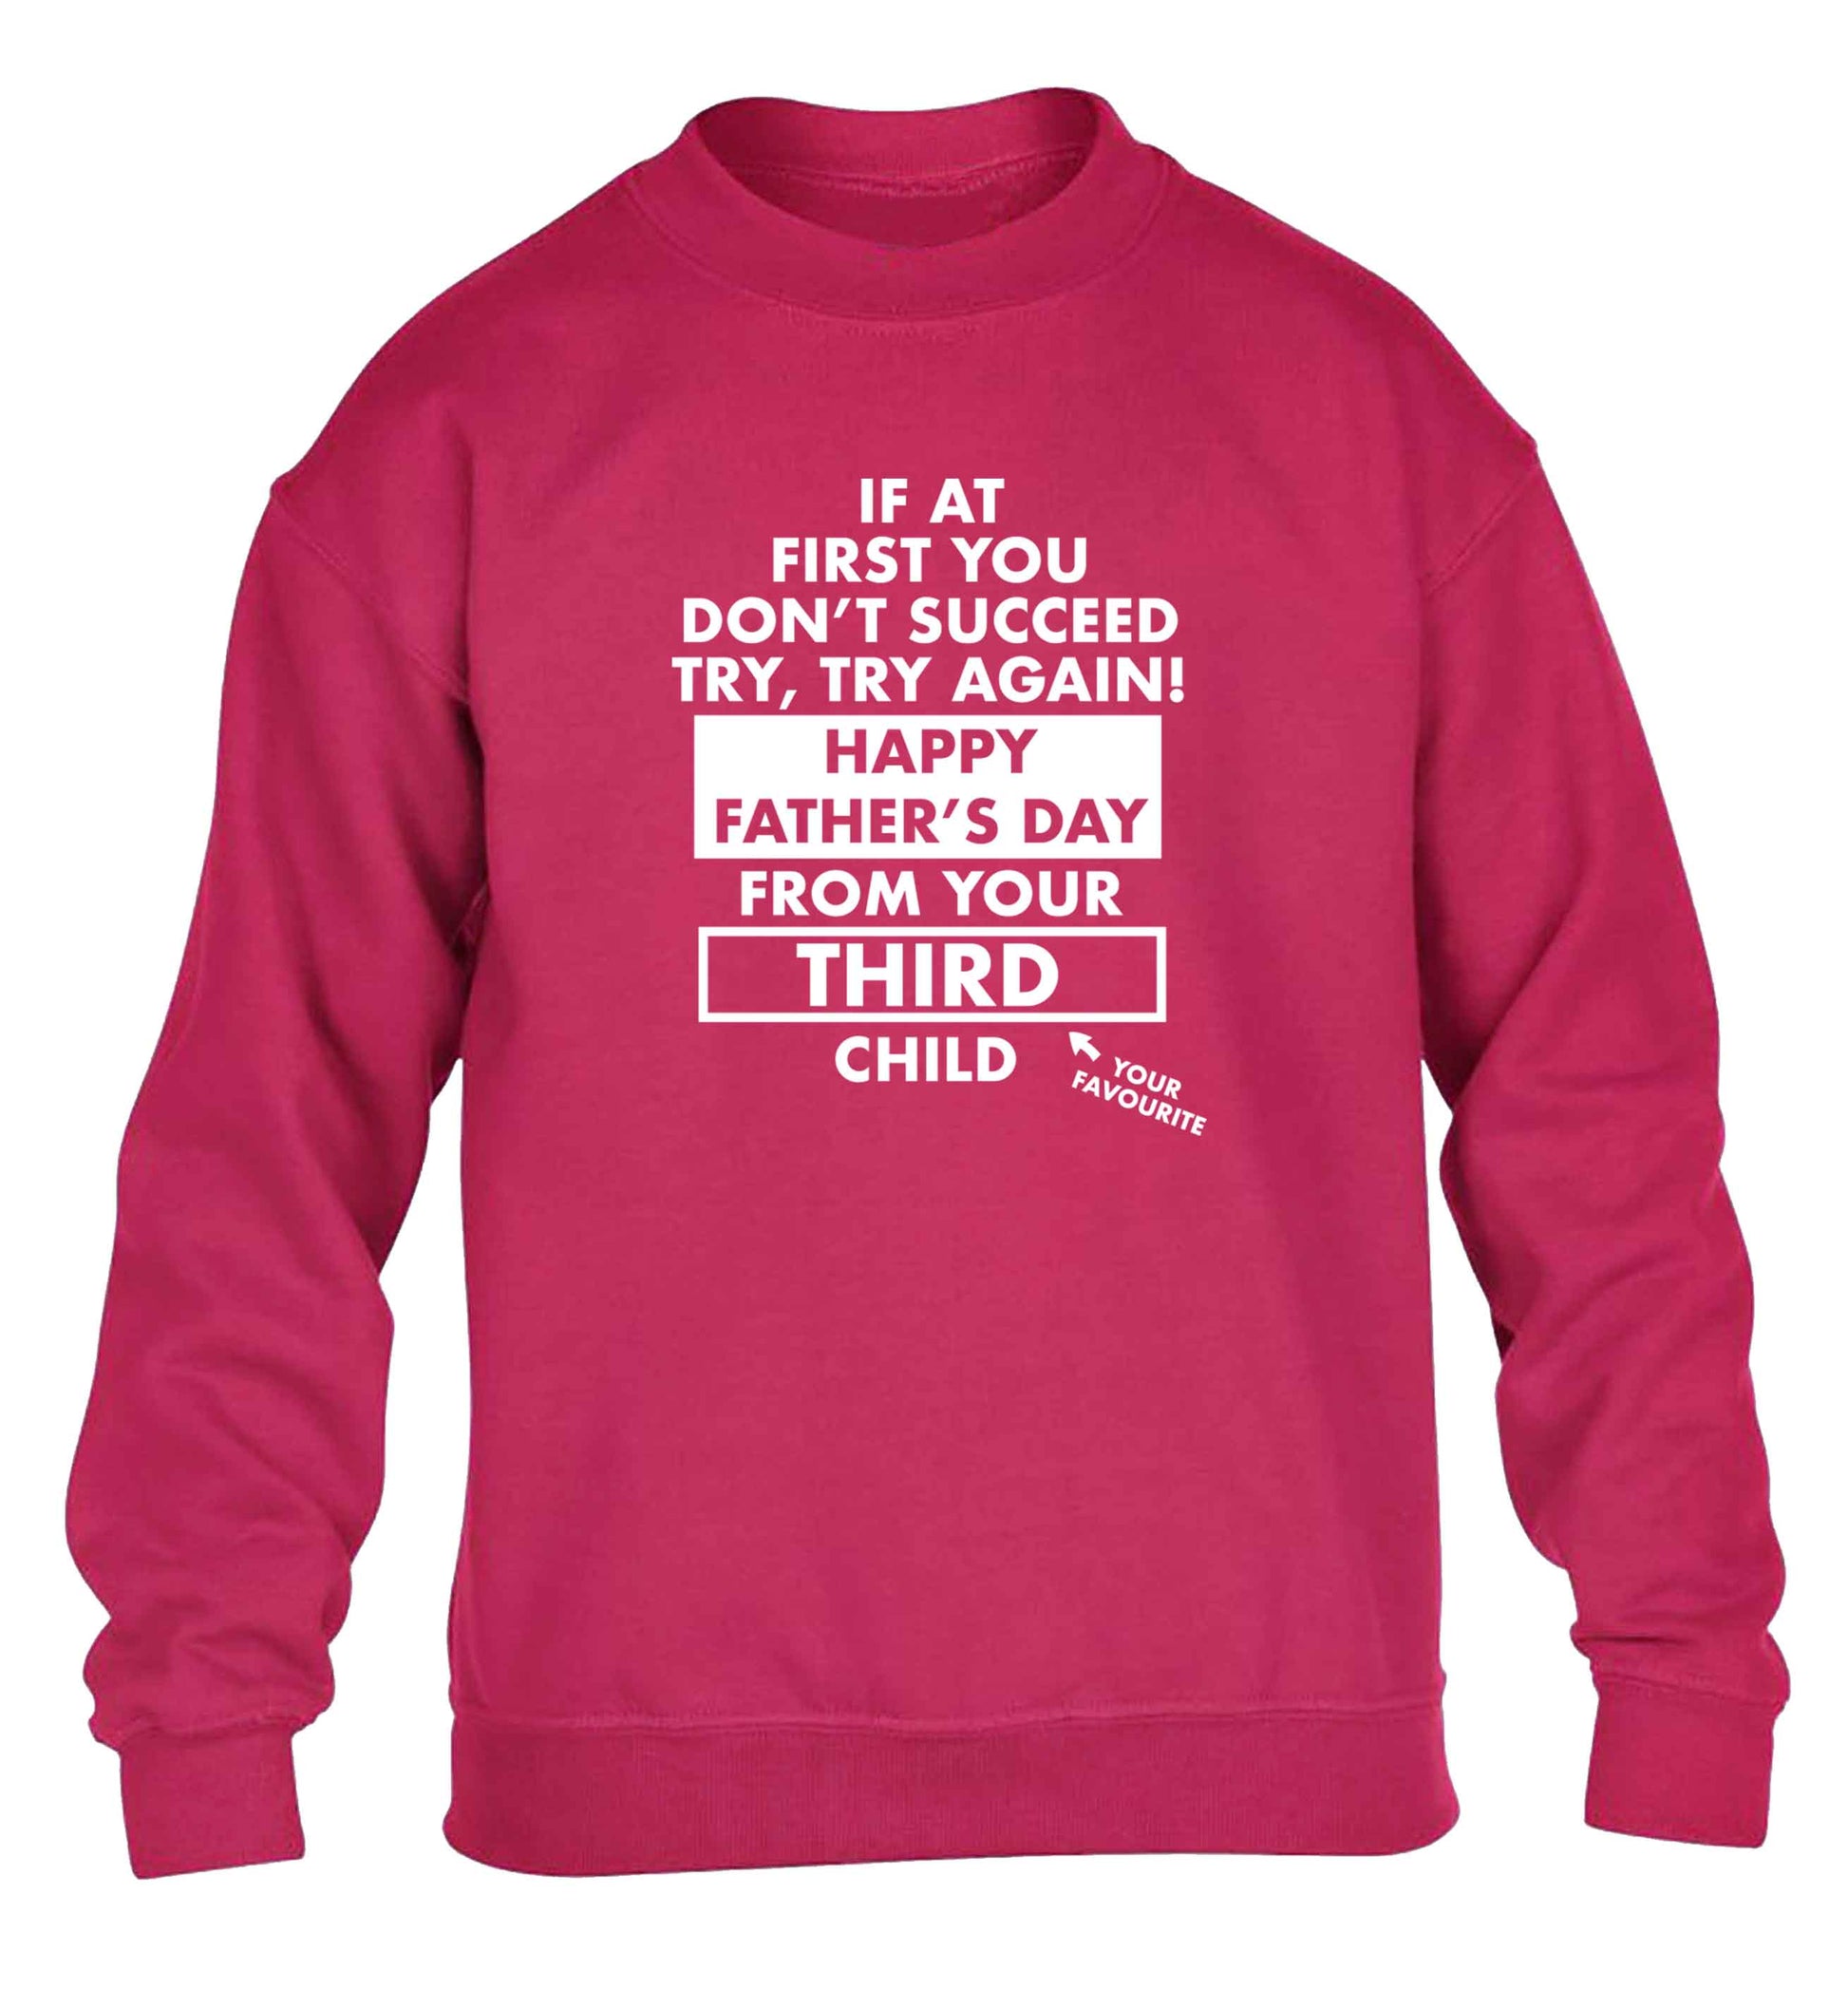 If at first you don't succeed try, try again Happy Father's day from your third child! children's pink sweater 12-13 Years